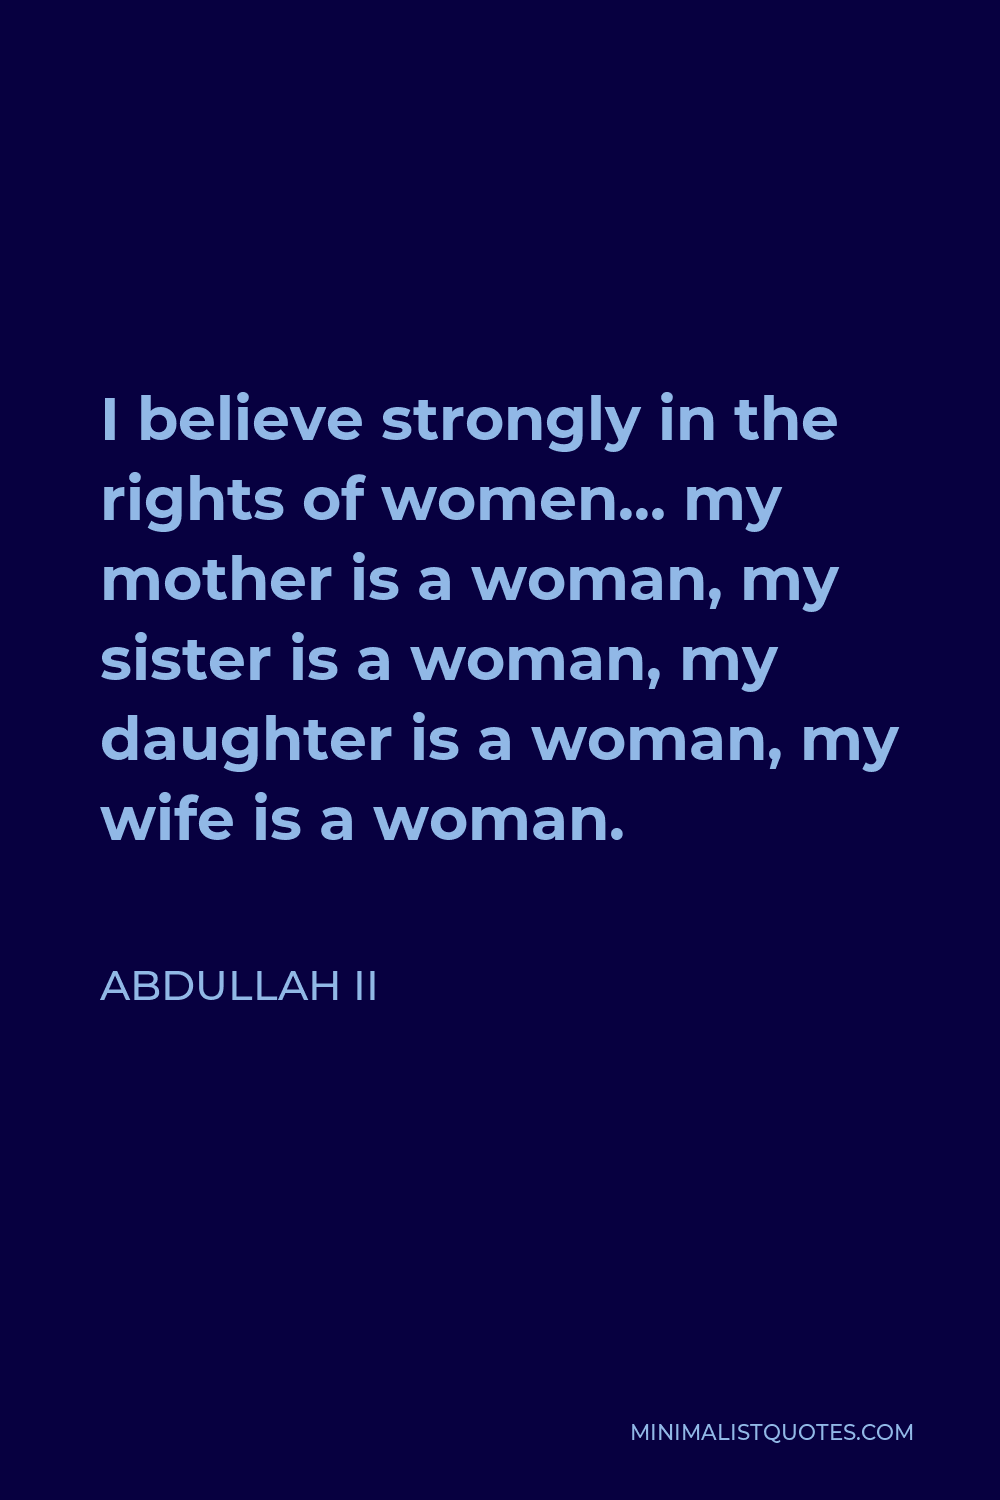 Abdullah II Quote - I believe strongly in the rights of women… my mother is a woman, my sister is a woman, my daughter is a woman, my wife is a woman.